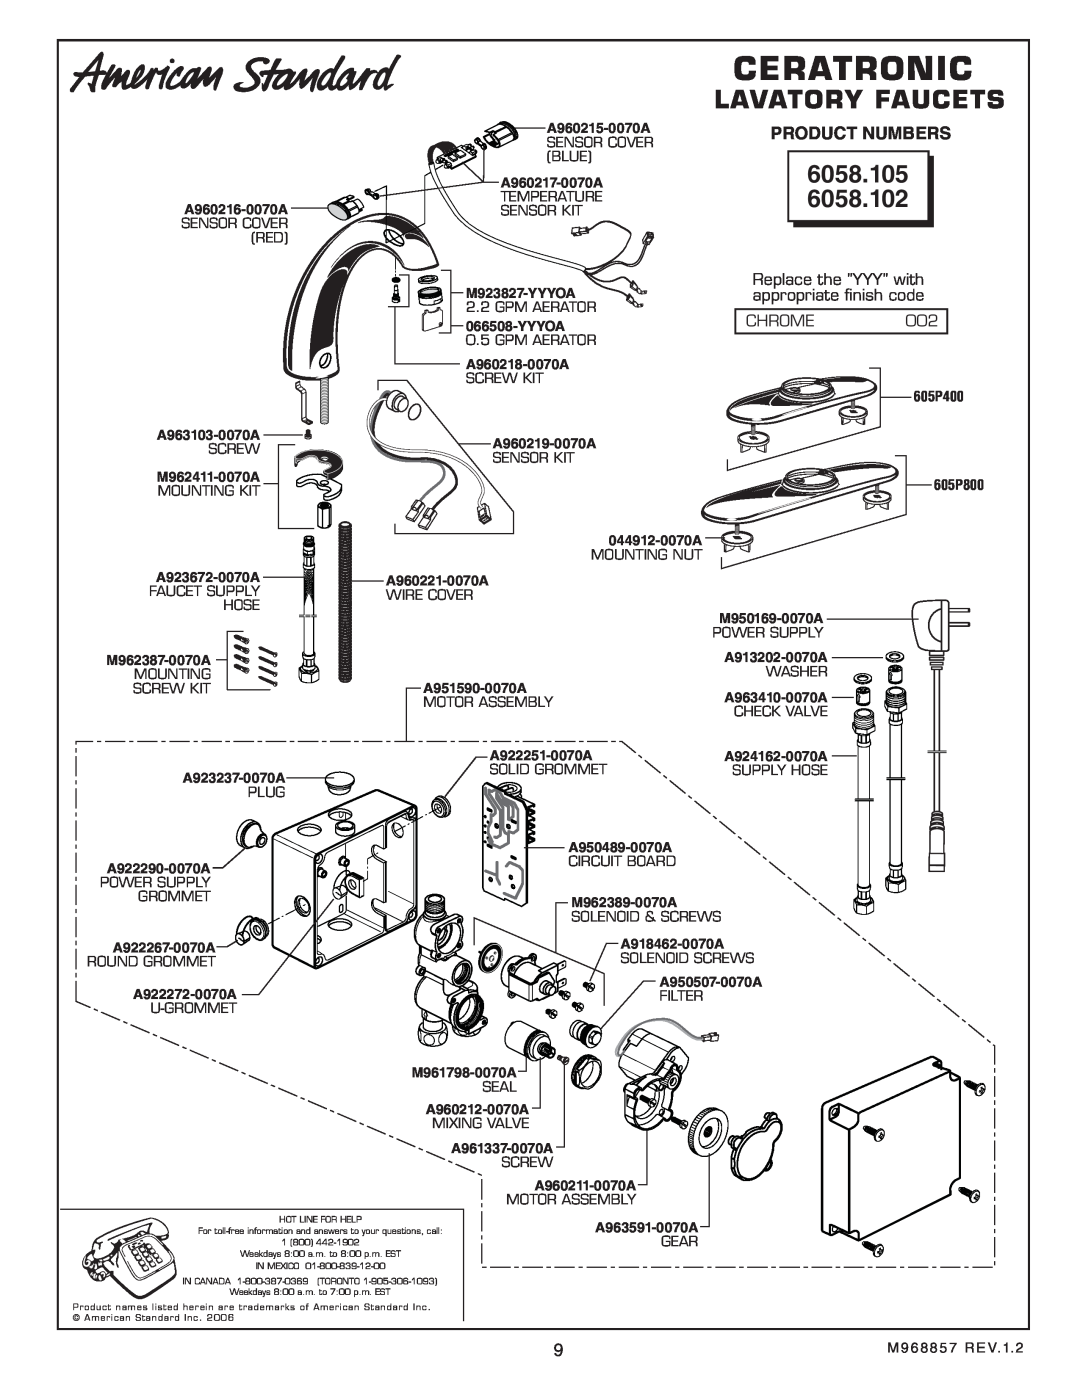 American Standard 6058.102 installation instructions Ceratronic, Lavatory Faucets, 6058.105 